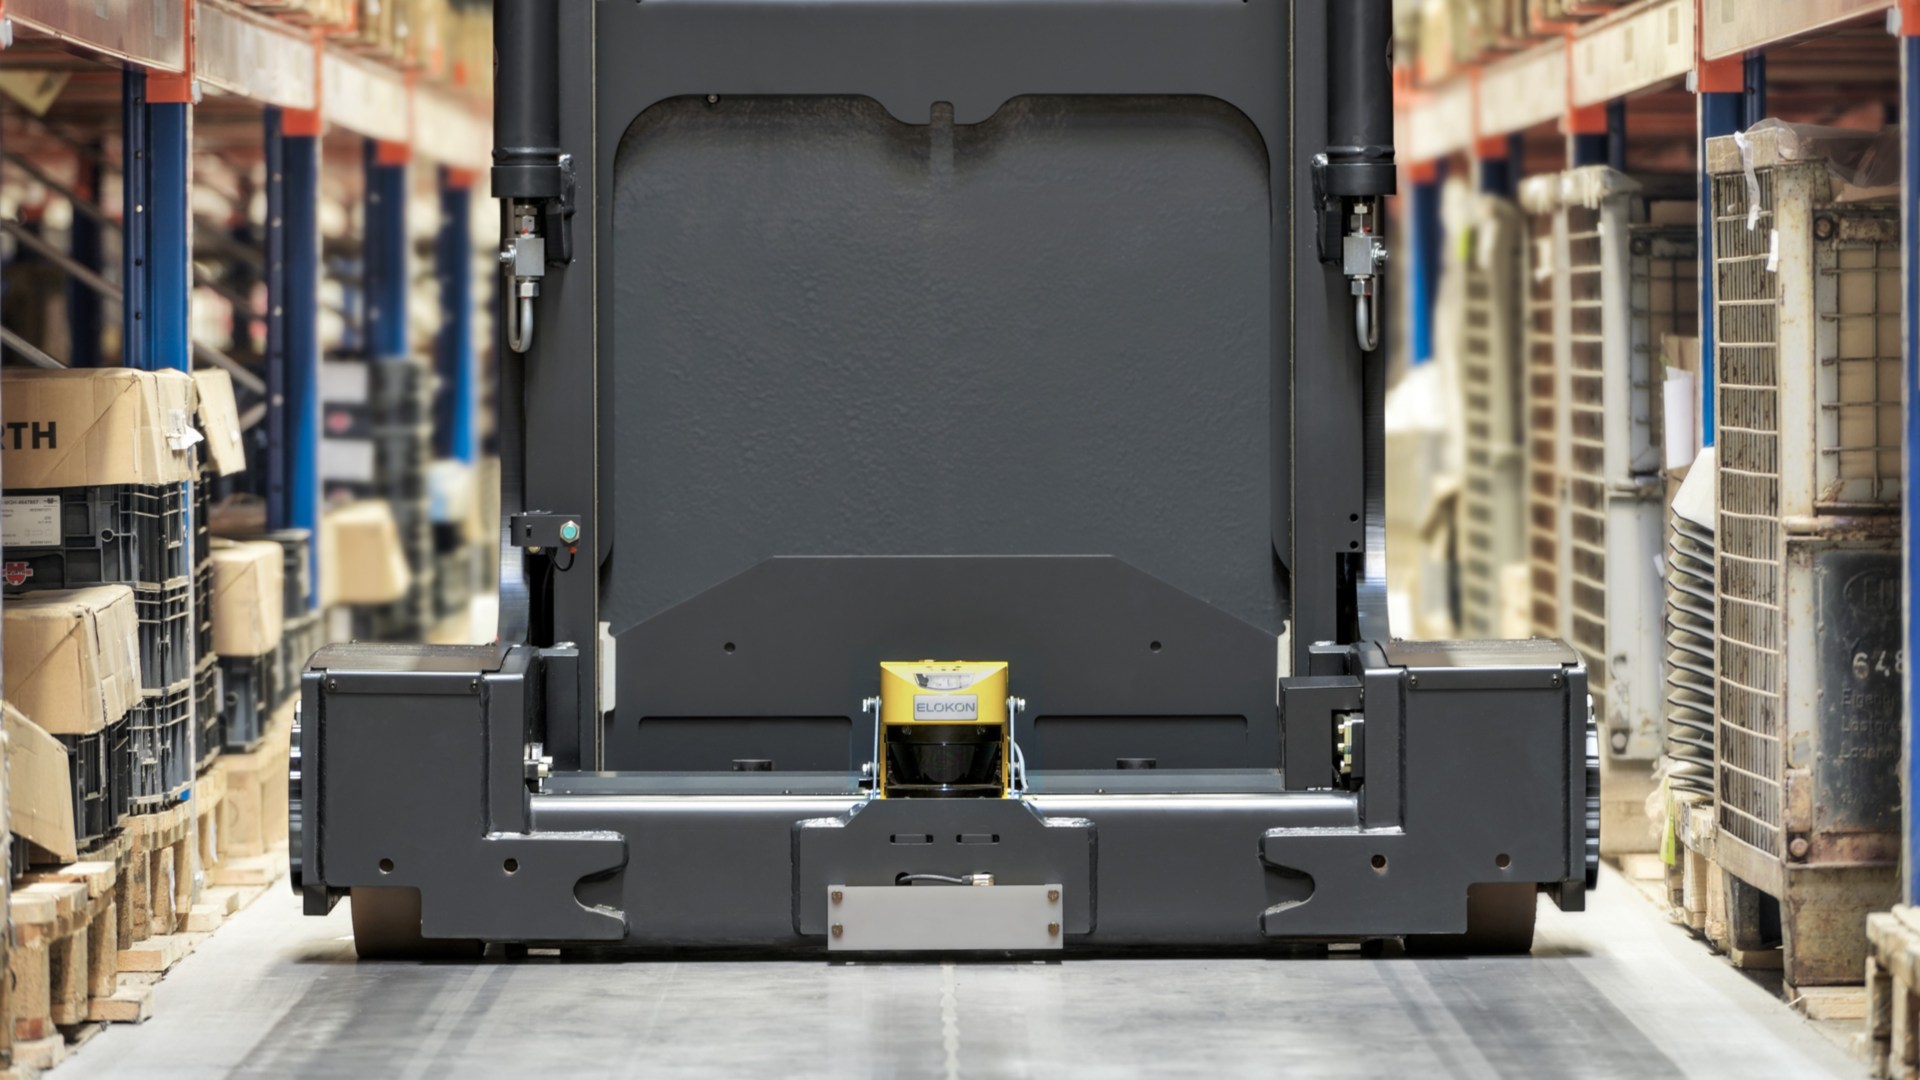 Pallet stacker from Linde Material Handling during maneuvers